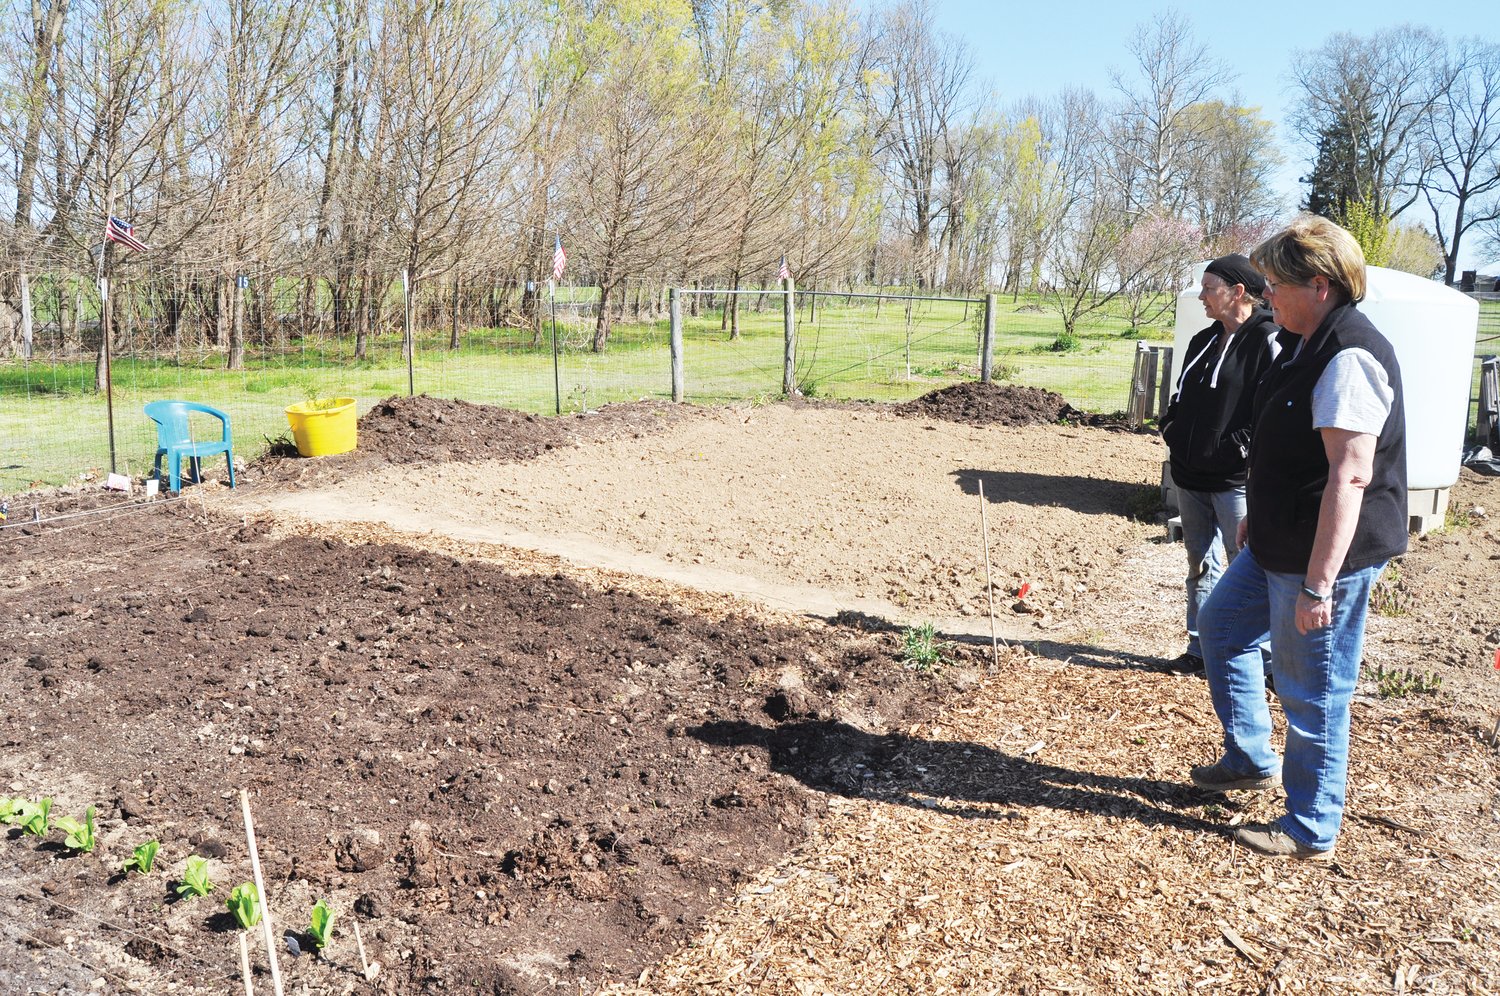 Sue Lucas, left, president of Sustainable Initiatives of Montgomery County, and Susan Smith, co-host of the Crawfordsville Community Garden, look at a freshly-planted plot.